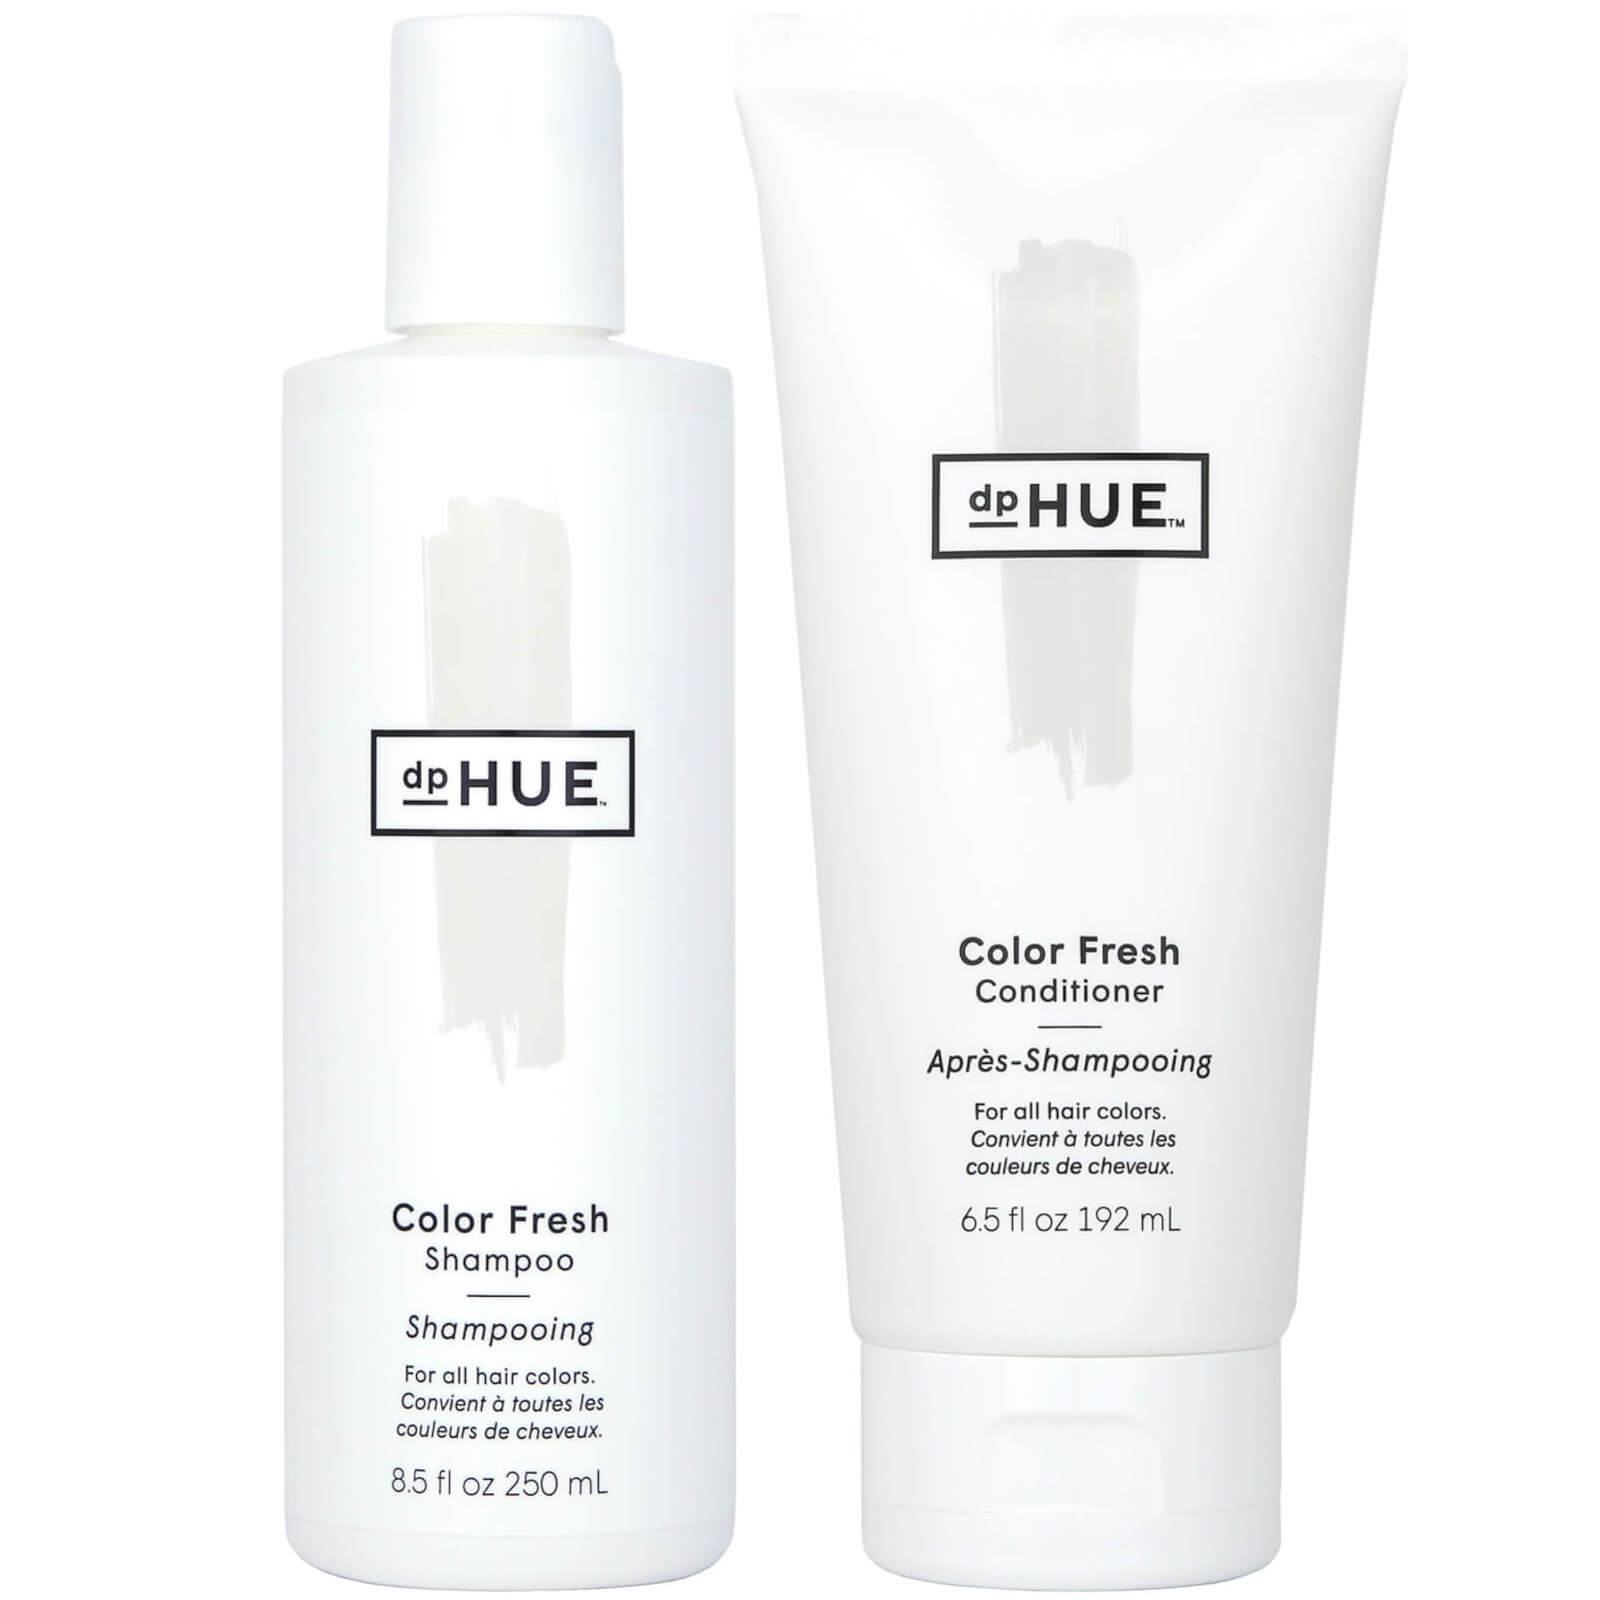 Dphue Colour Fresh Shampoo And Conditioner Duo